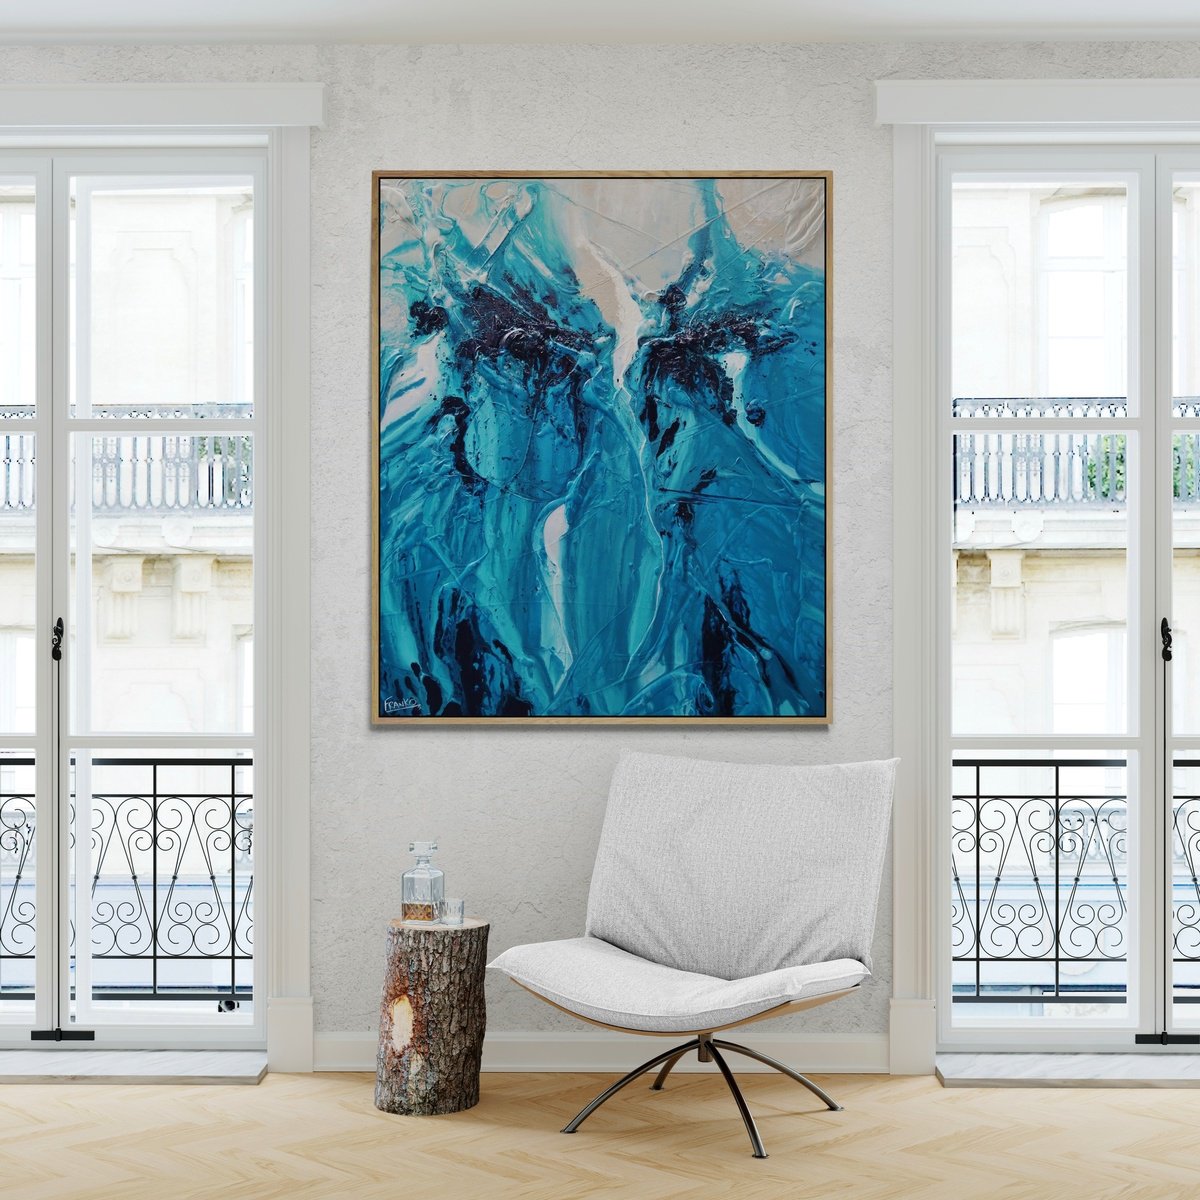 Turquoise Moon 120cm x 100cm Textured Abstract Art by Franko